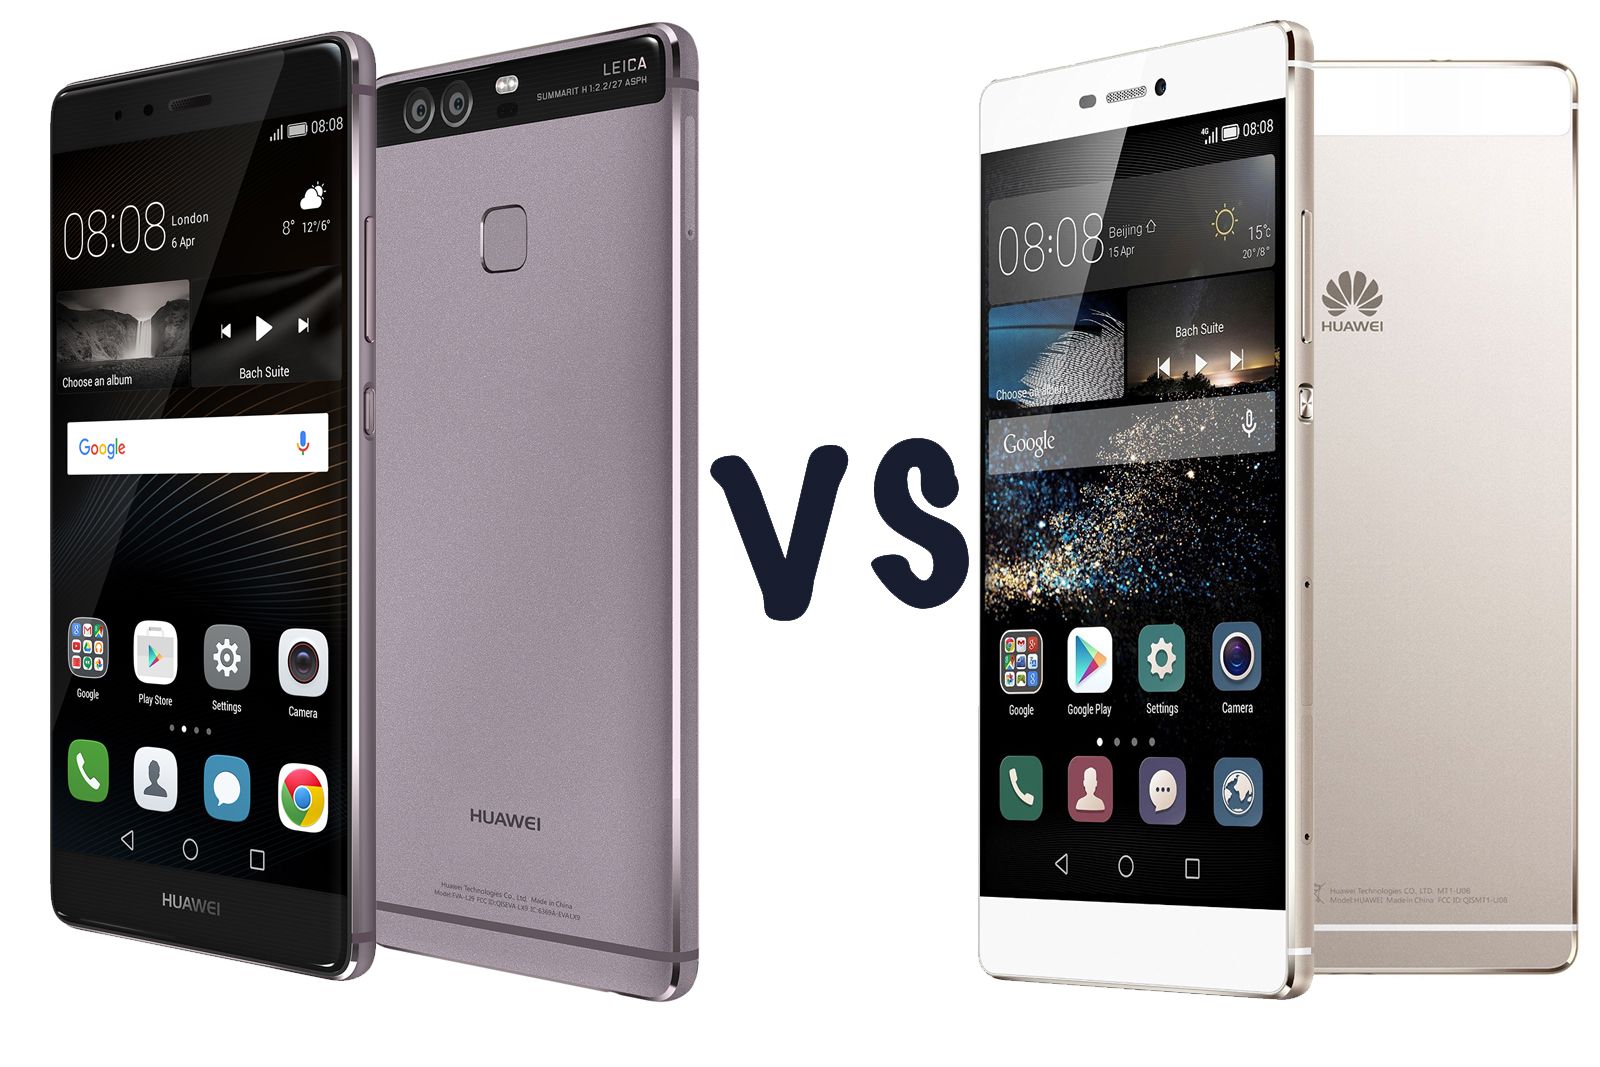 huawei p9 vs p8 is it worth upgrading  image 1